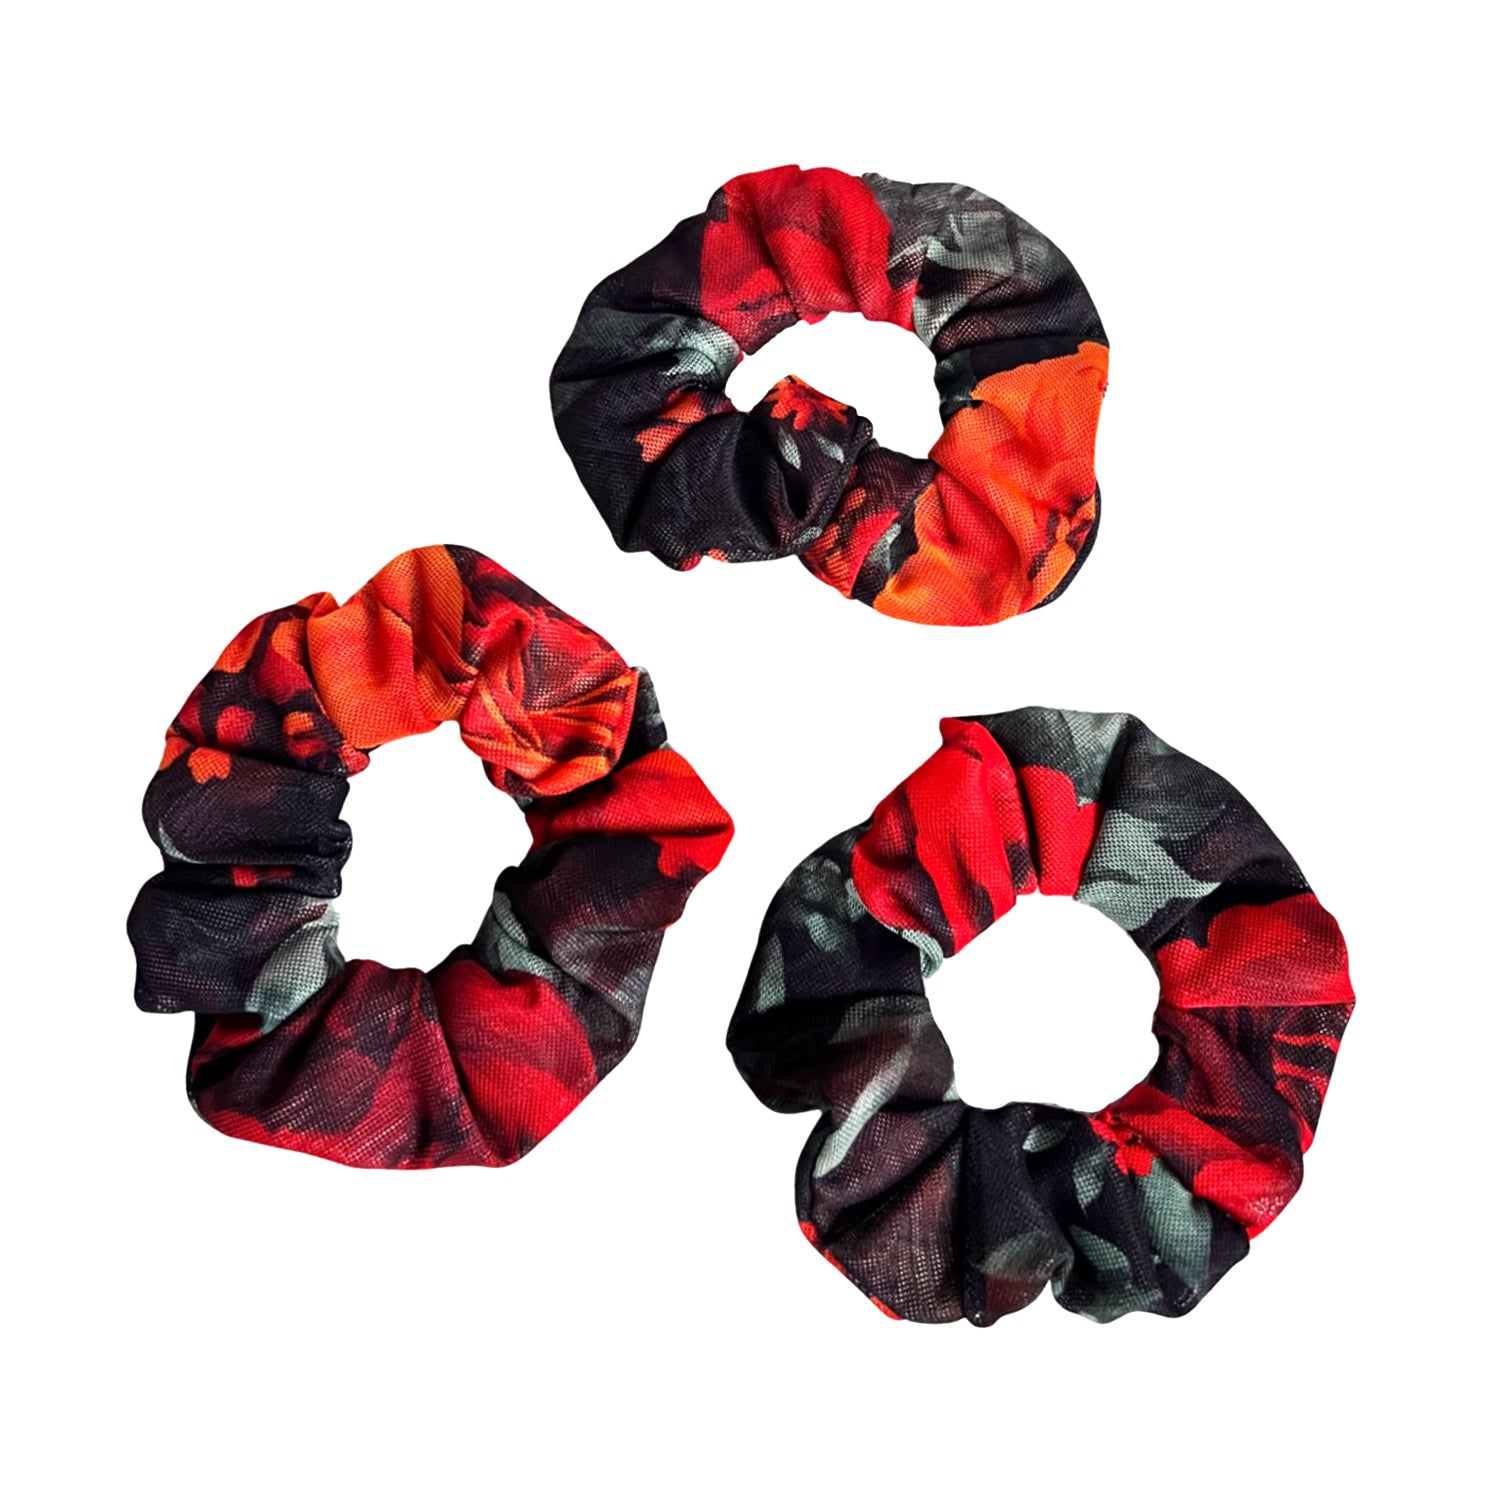 L2r The Label Women's Black / Red Eco-conscious Scrunchy In Floral Black & Red Print - Pack Of 3